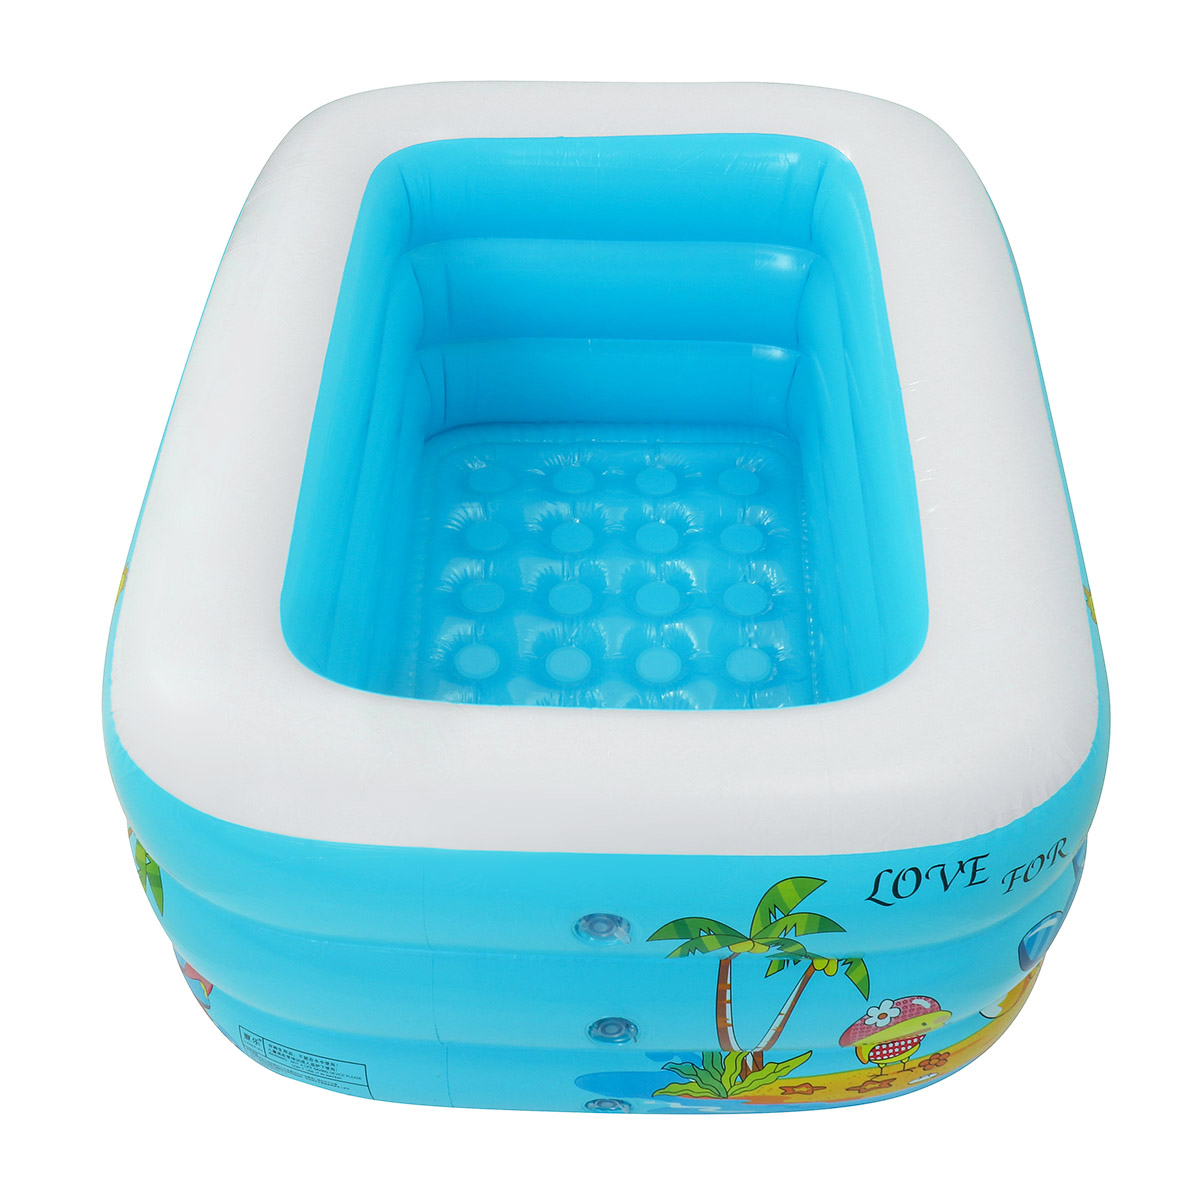 120-150CM-Family-Inflatable-Swimming-Pool-3-Ring-Thicken-Summer-Backyard-Inflate-Bathtub-for-Kids-Ad-1696845-11